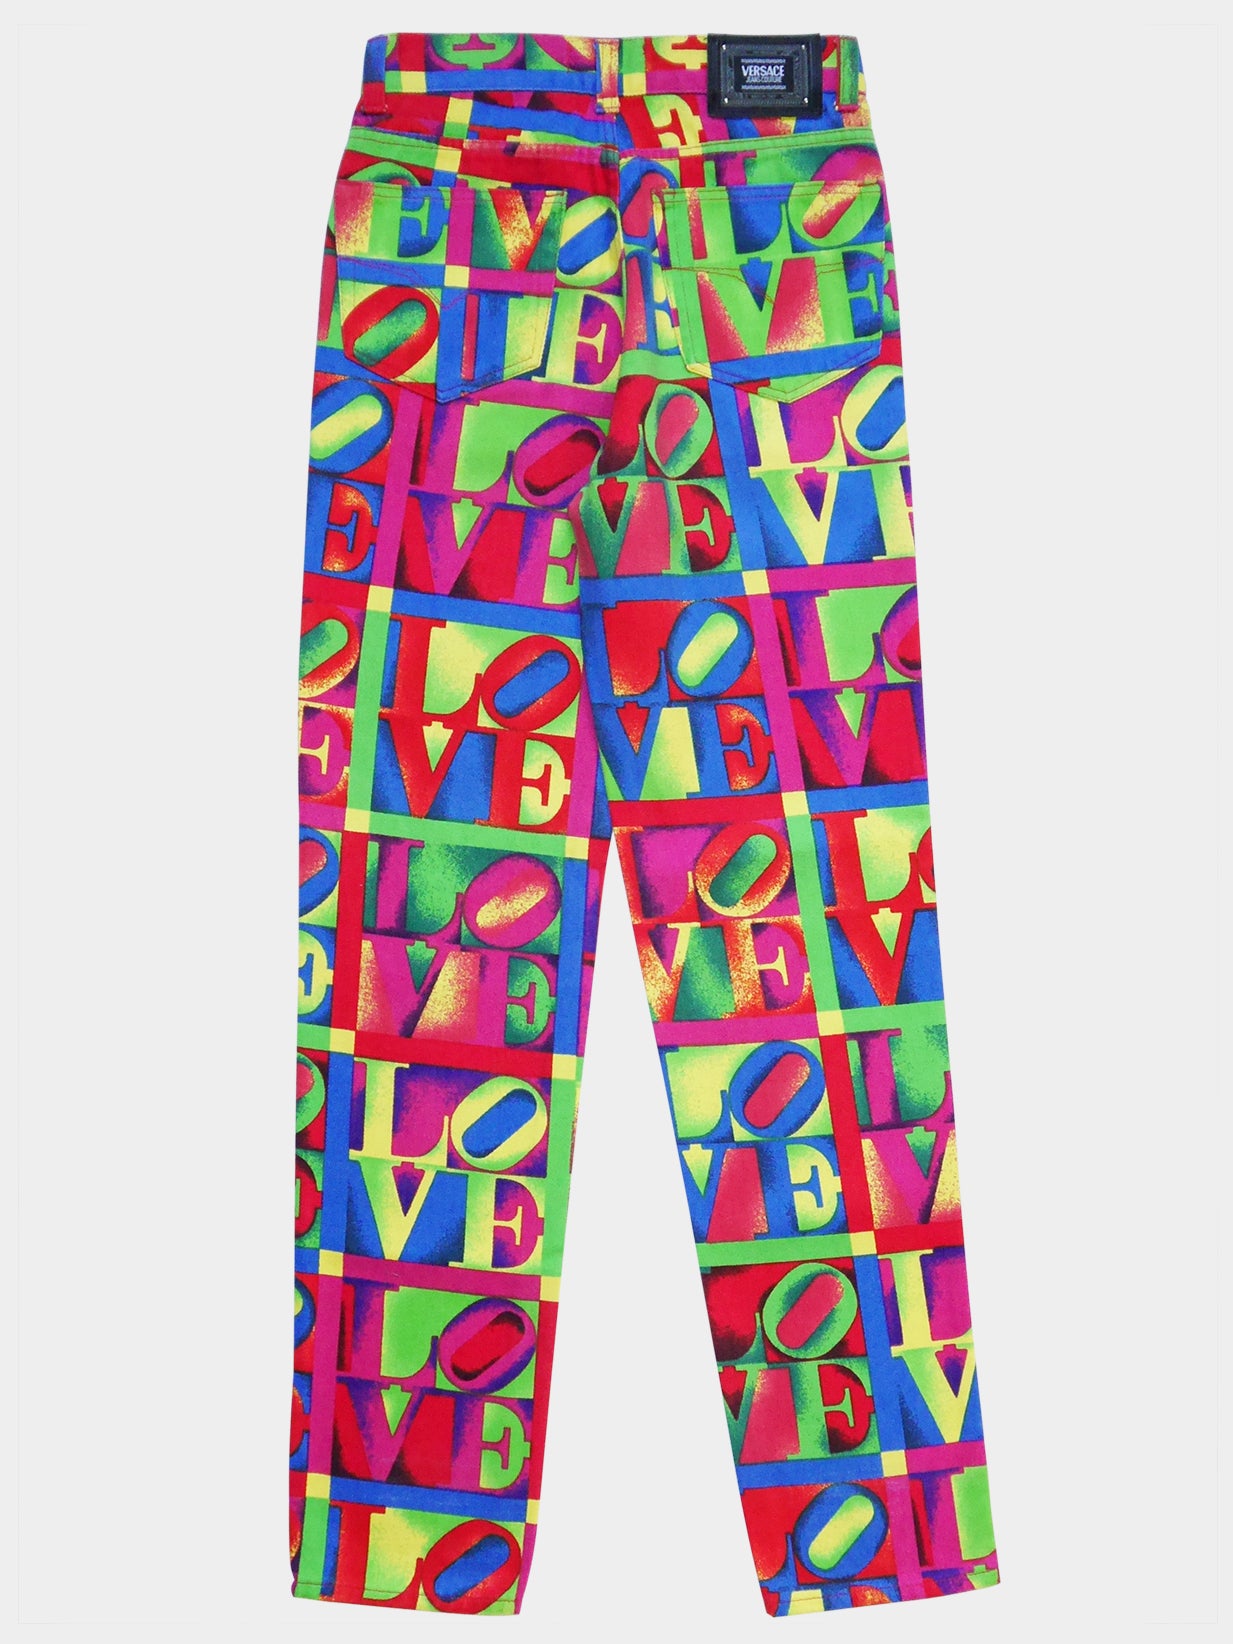 VERSACE Jeans Couture Spring 1995 Vintage Robert Indiana LOVE Print Denim Pants Size S